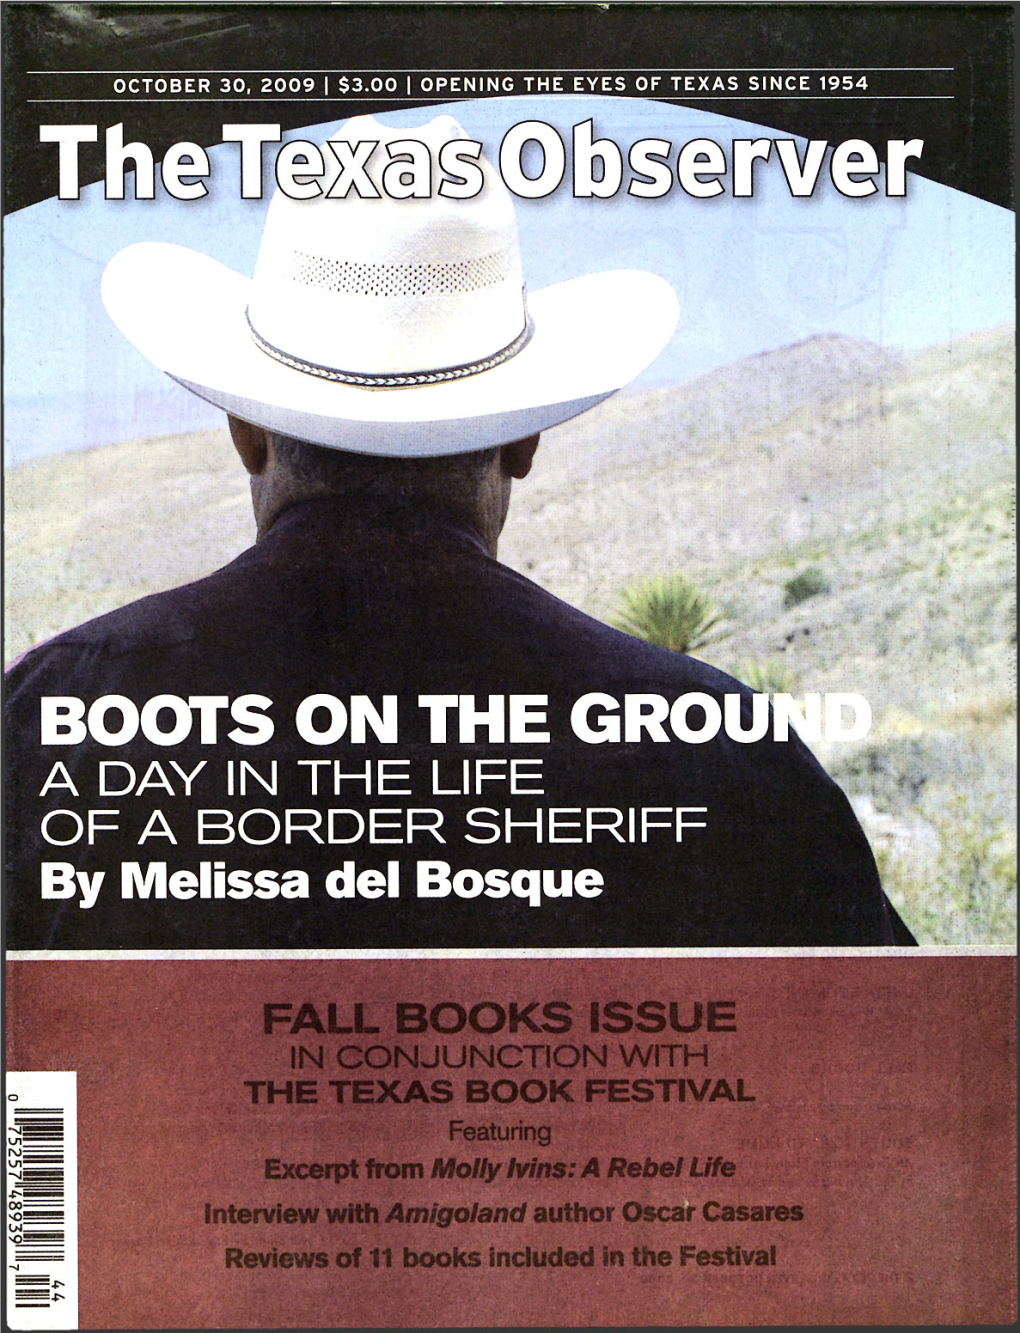 BOOTS on the GRO a DAY in the LIFE of a BORDER SHERIFF by Melissa Del Bosque LOON STAR STATE I BEN SARGENT